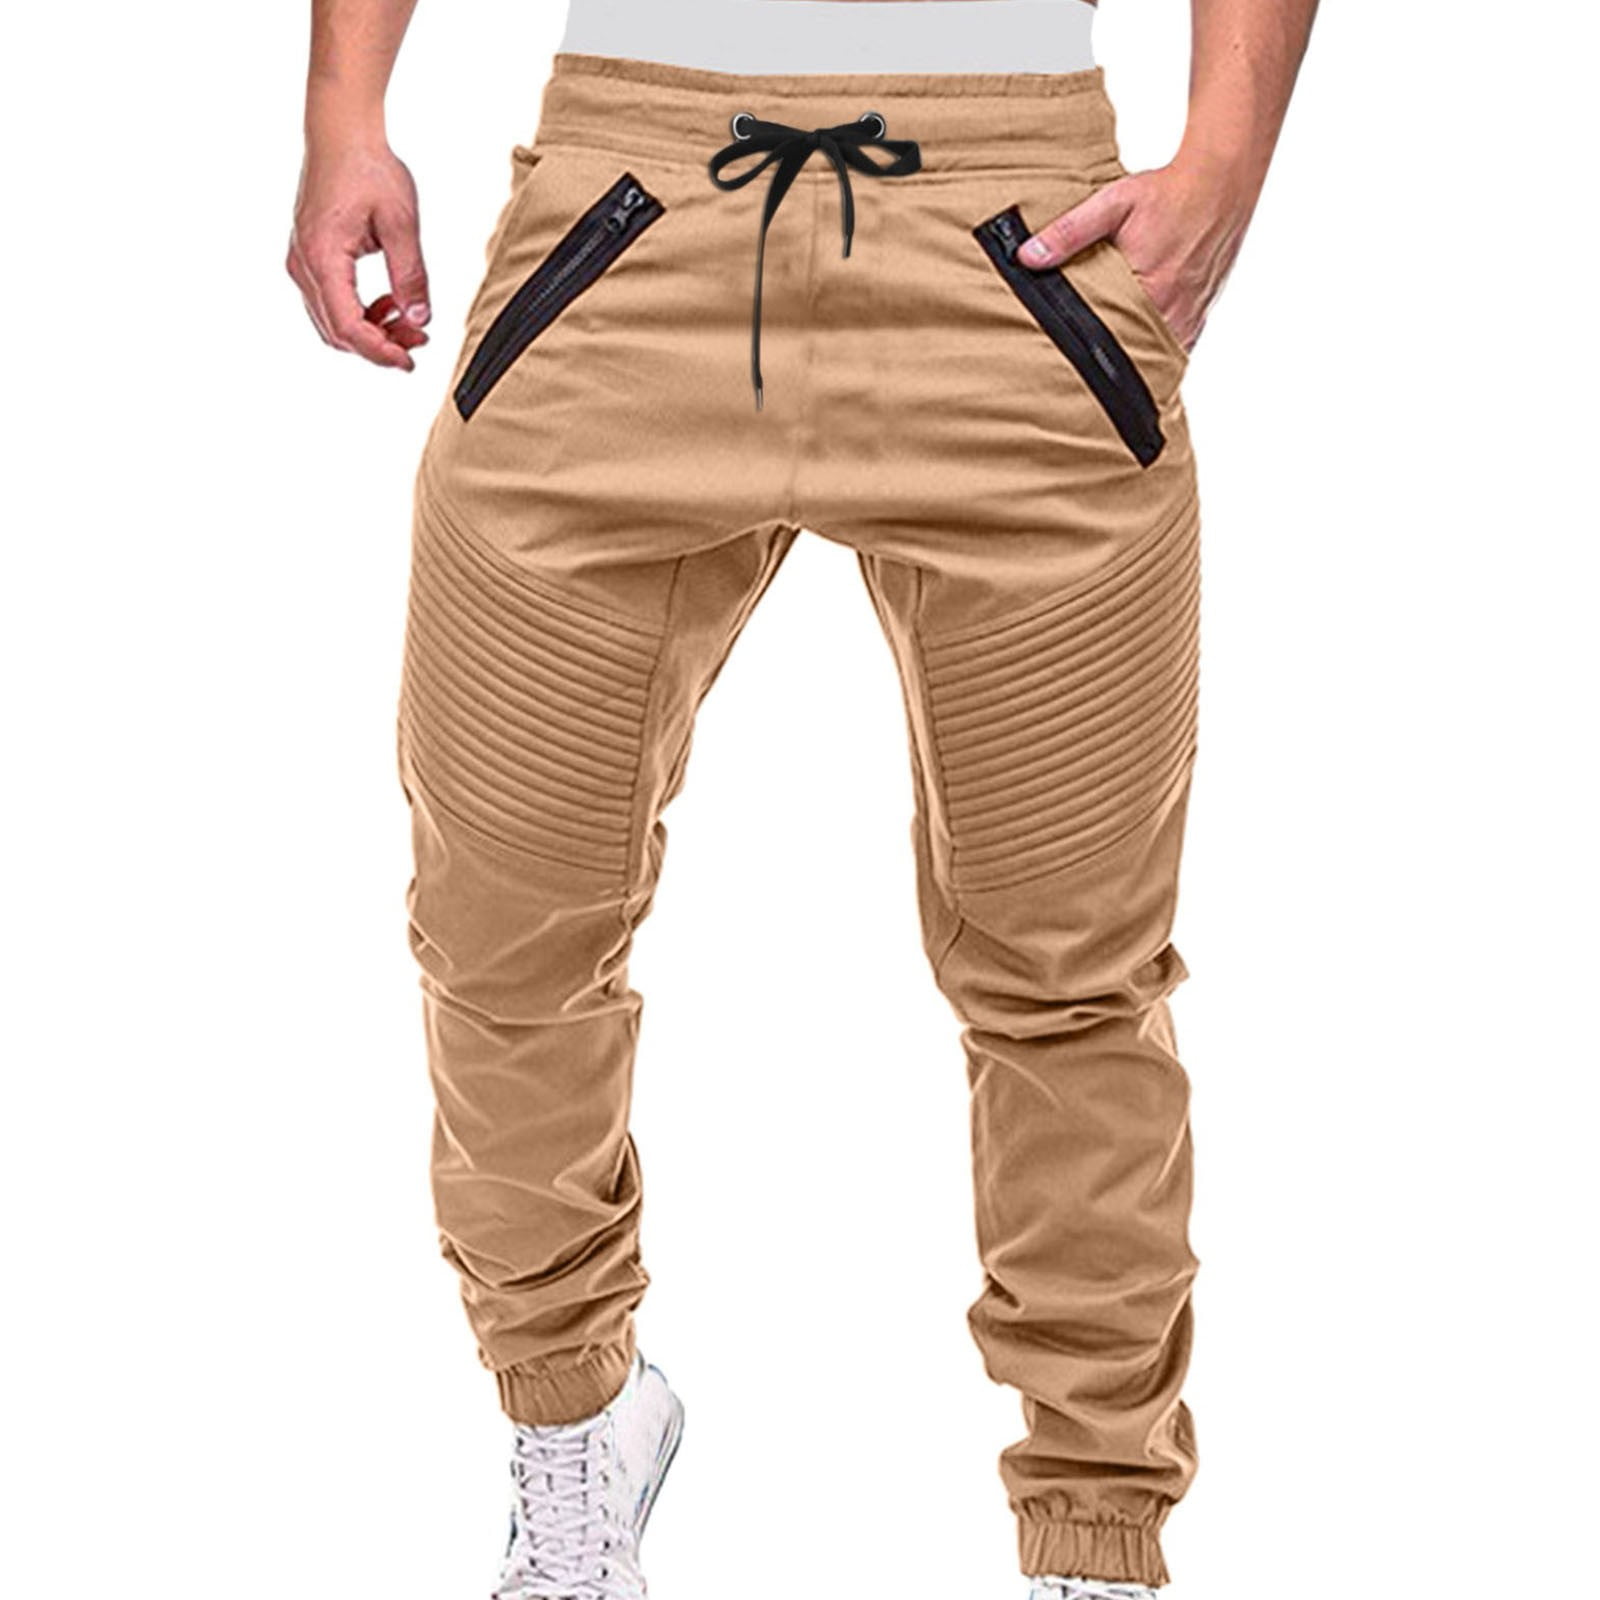 outfmvch joggers for men mid-waist sports drawstring with zipper ...